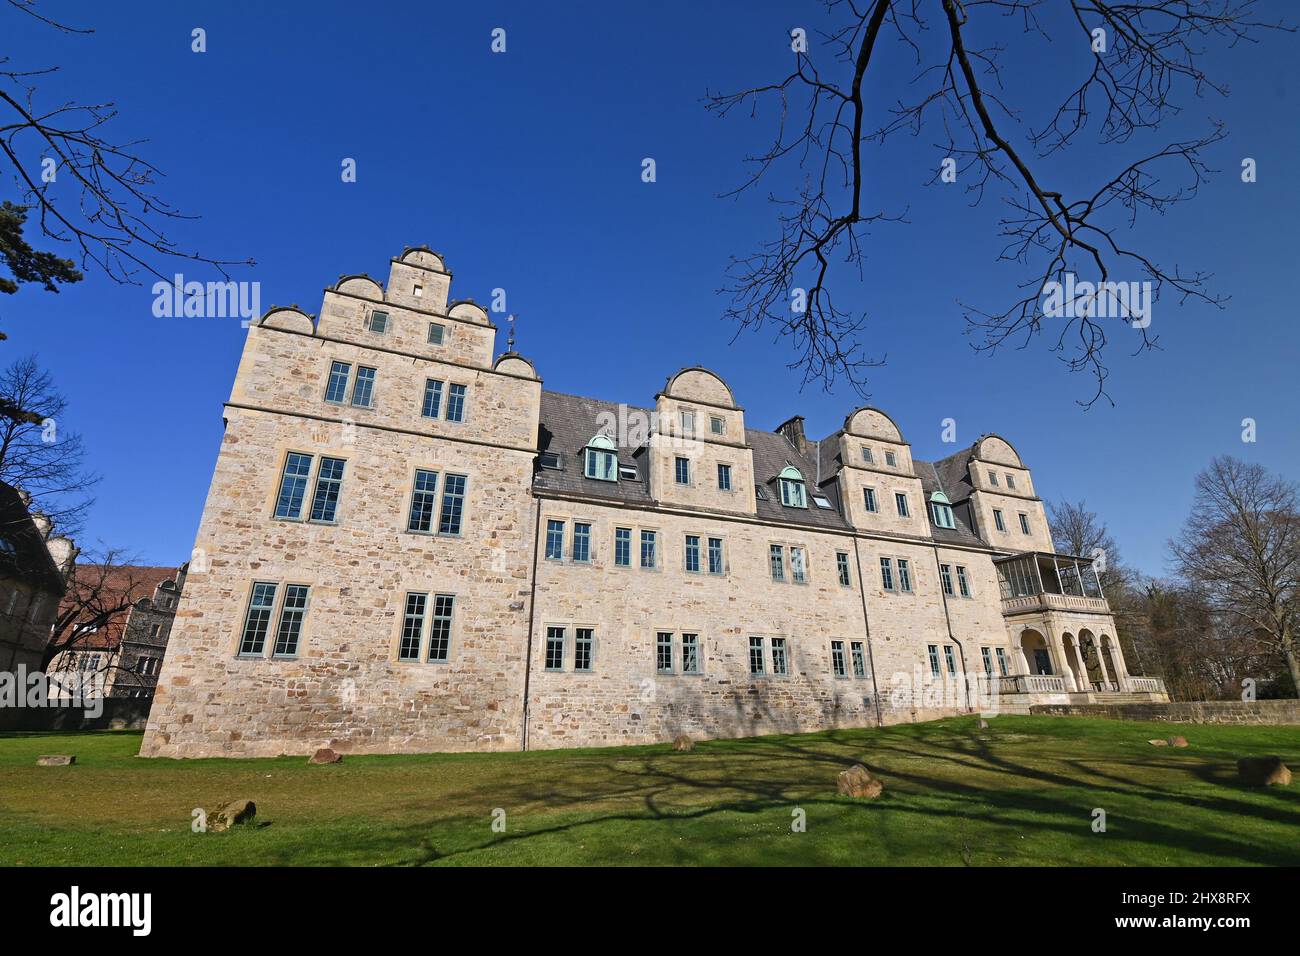 Castle in Weser Renaissance style Stock Photo